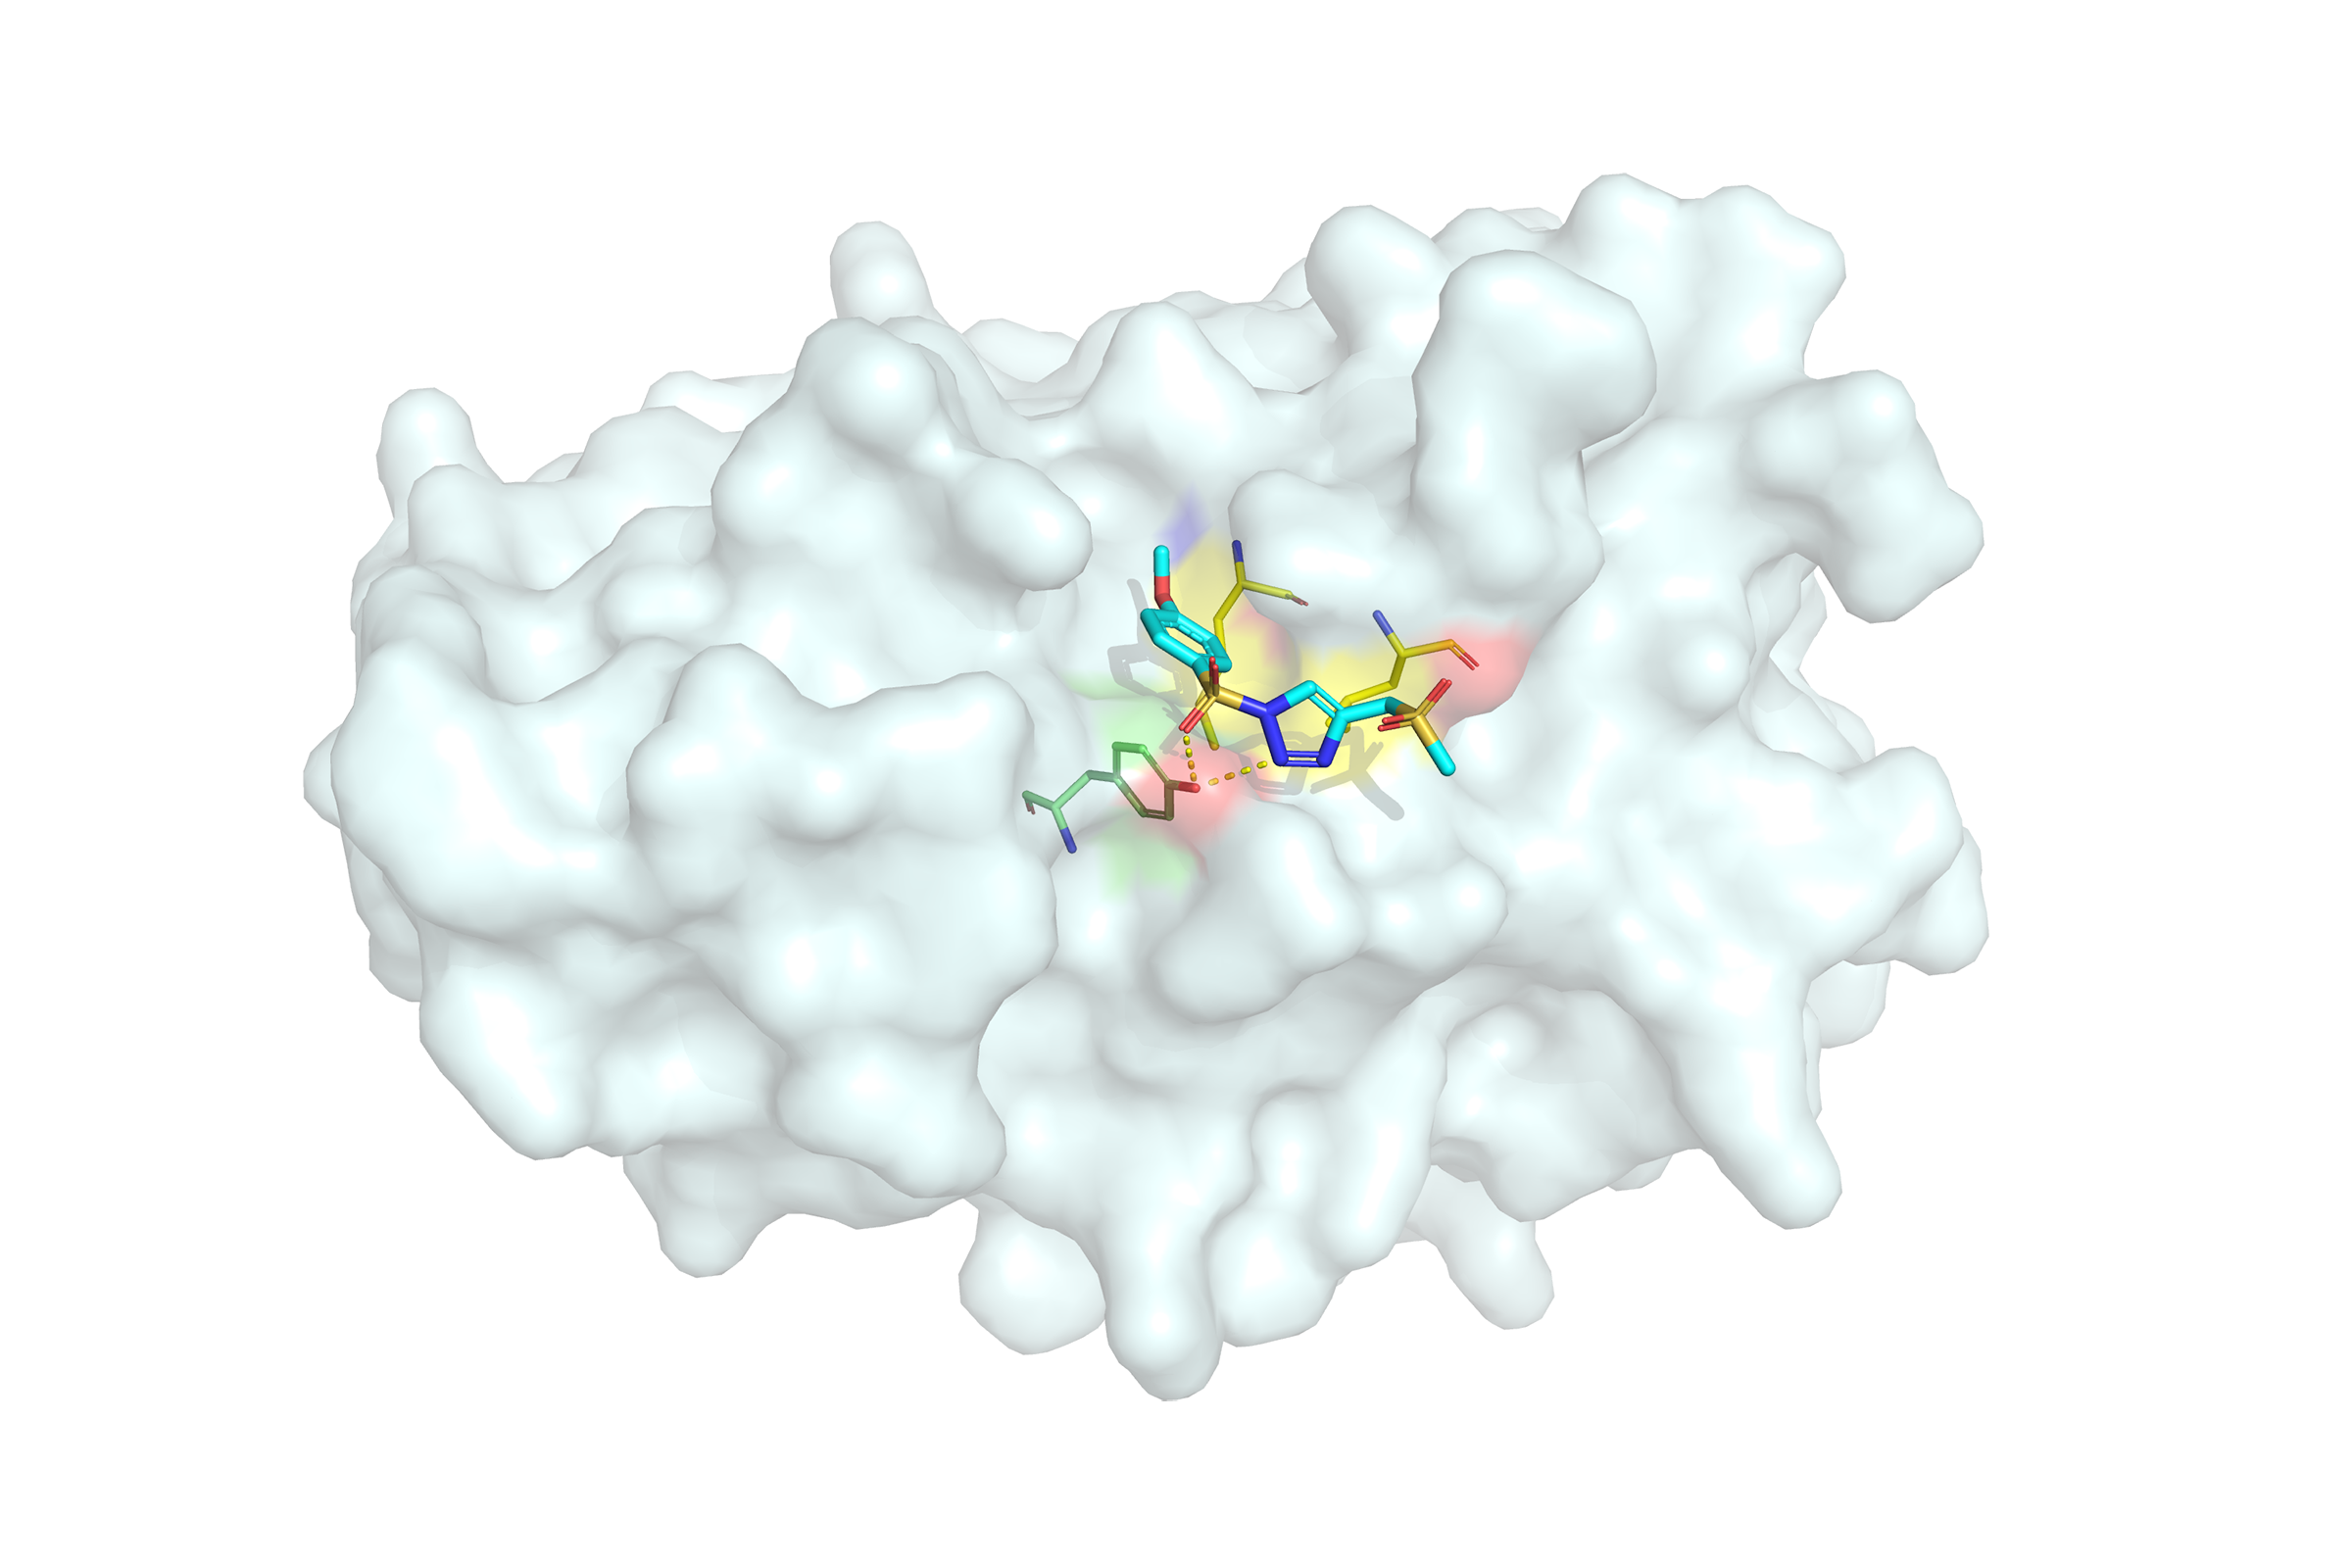 Using SuTex, short for sulfur-triazole exchange chemistry, Ken Hsu has created an approach to target sites on proteins that have extra electrons to share. This covalent bond is very stable compared with bonds formed by traditional drugs. Credit: Zhihong Li